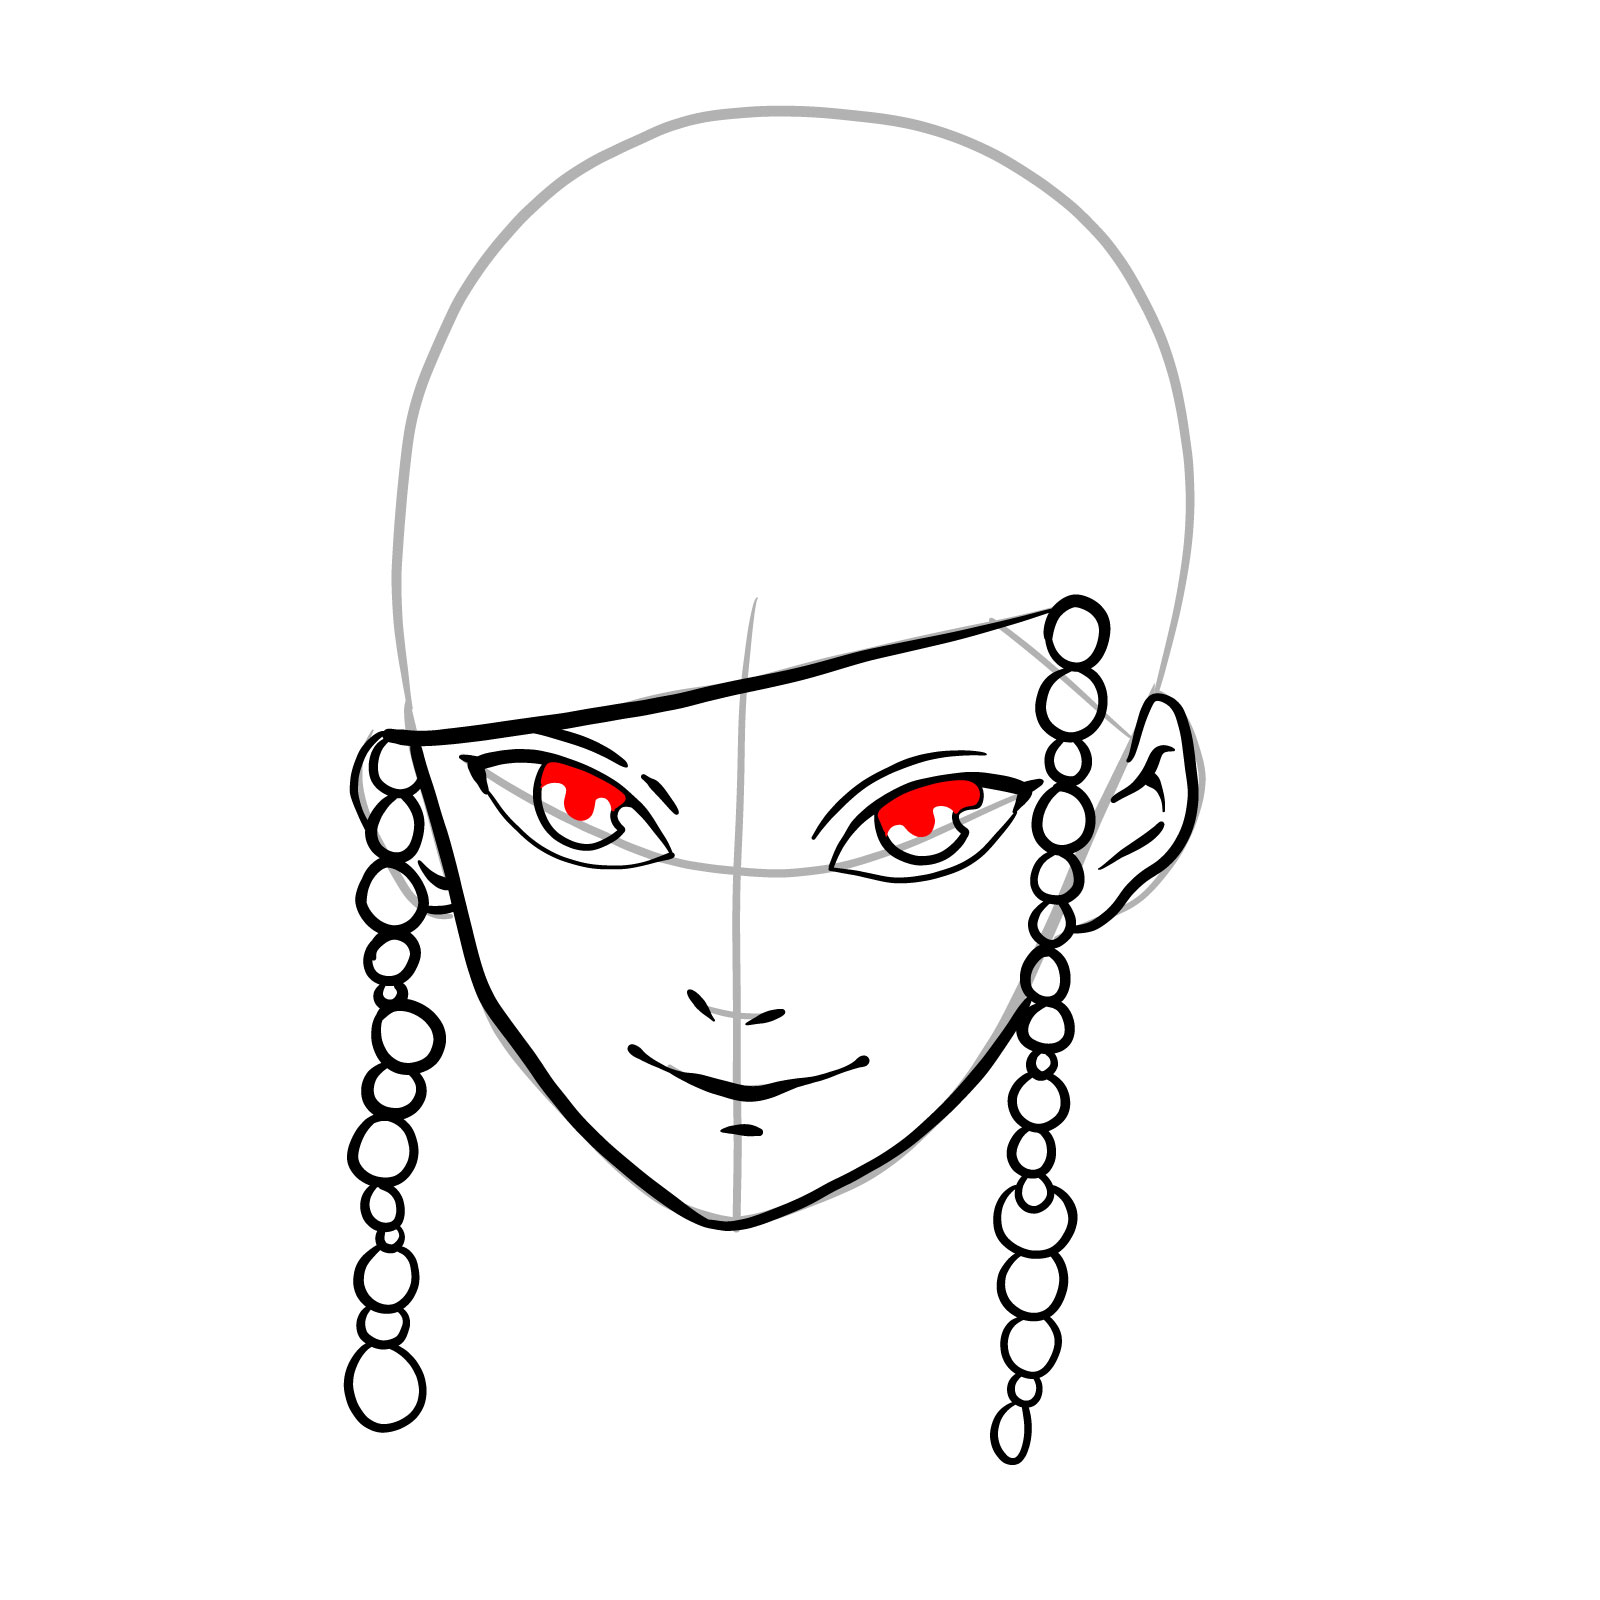 How to draw Lord Tengen's face - step 12